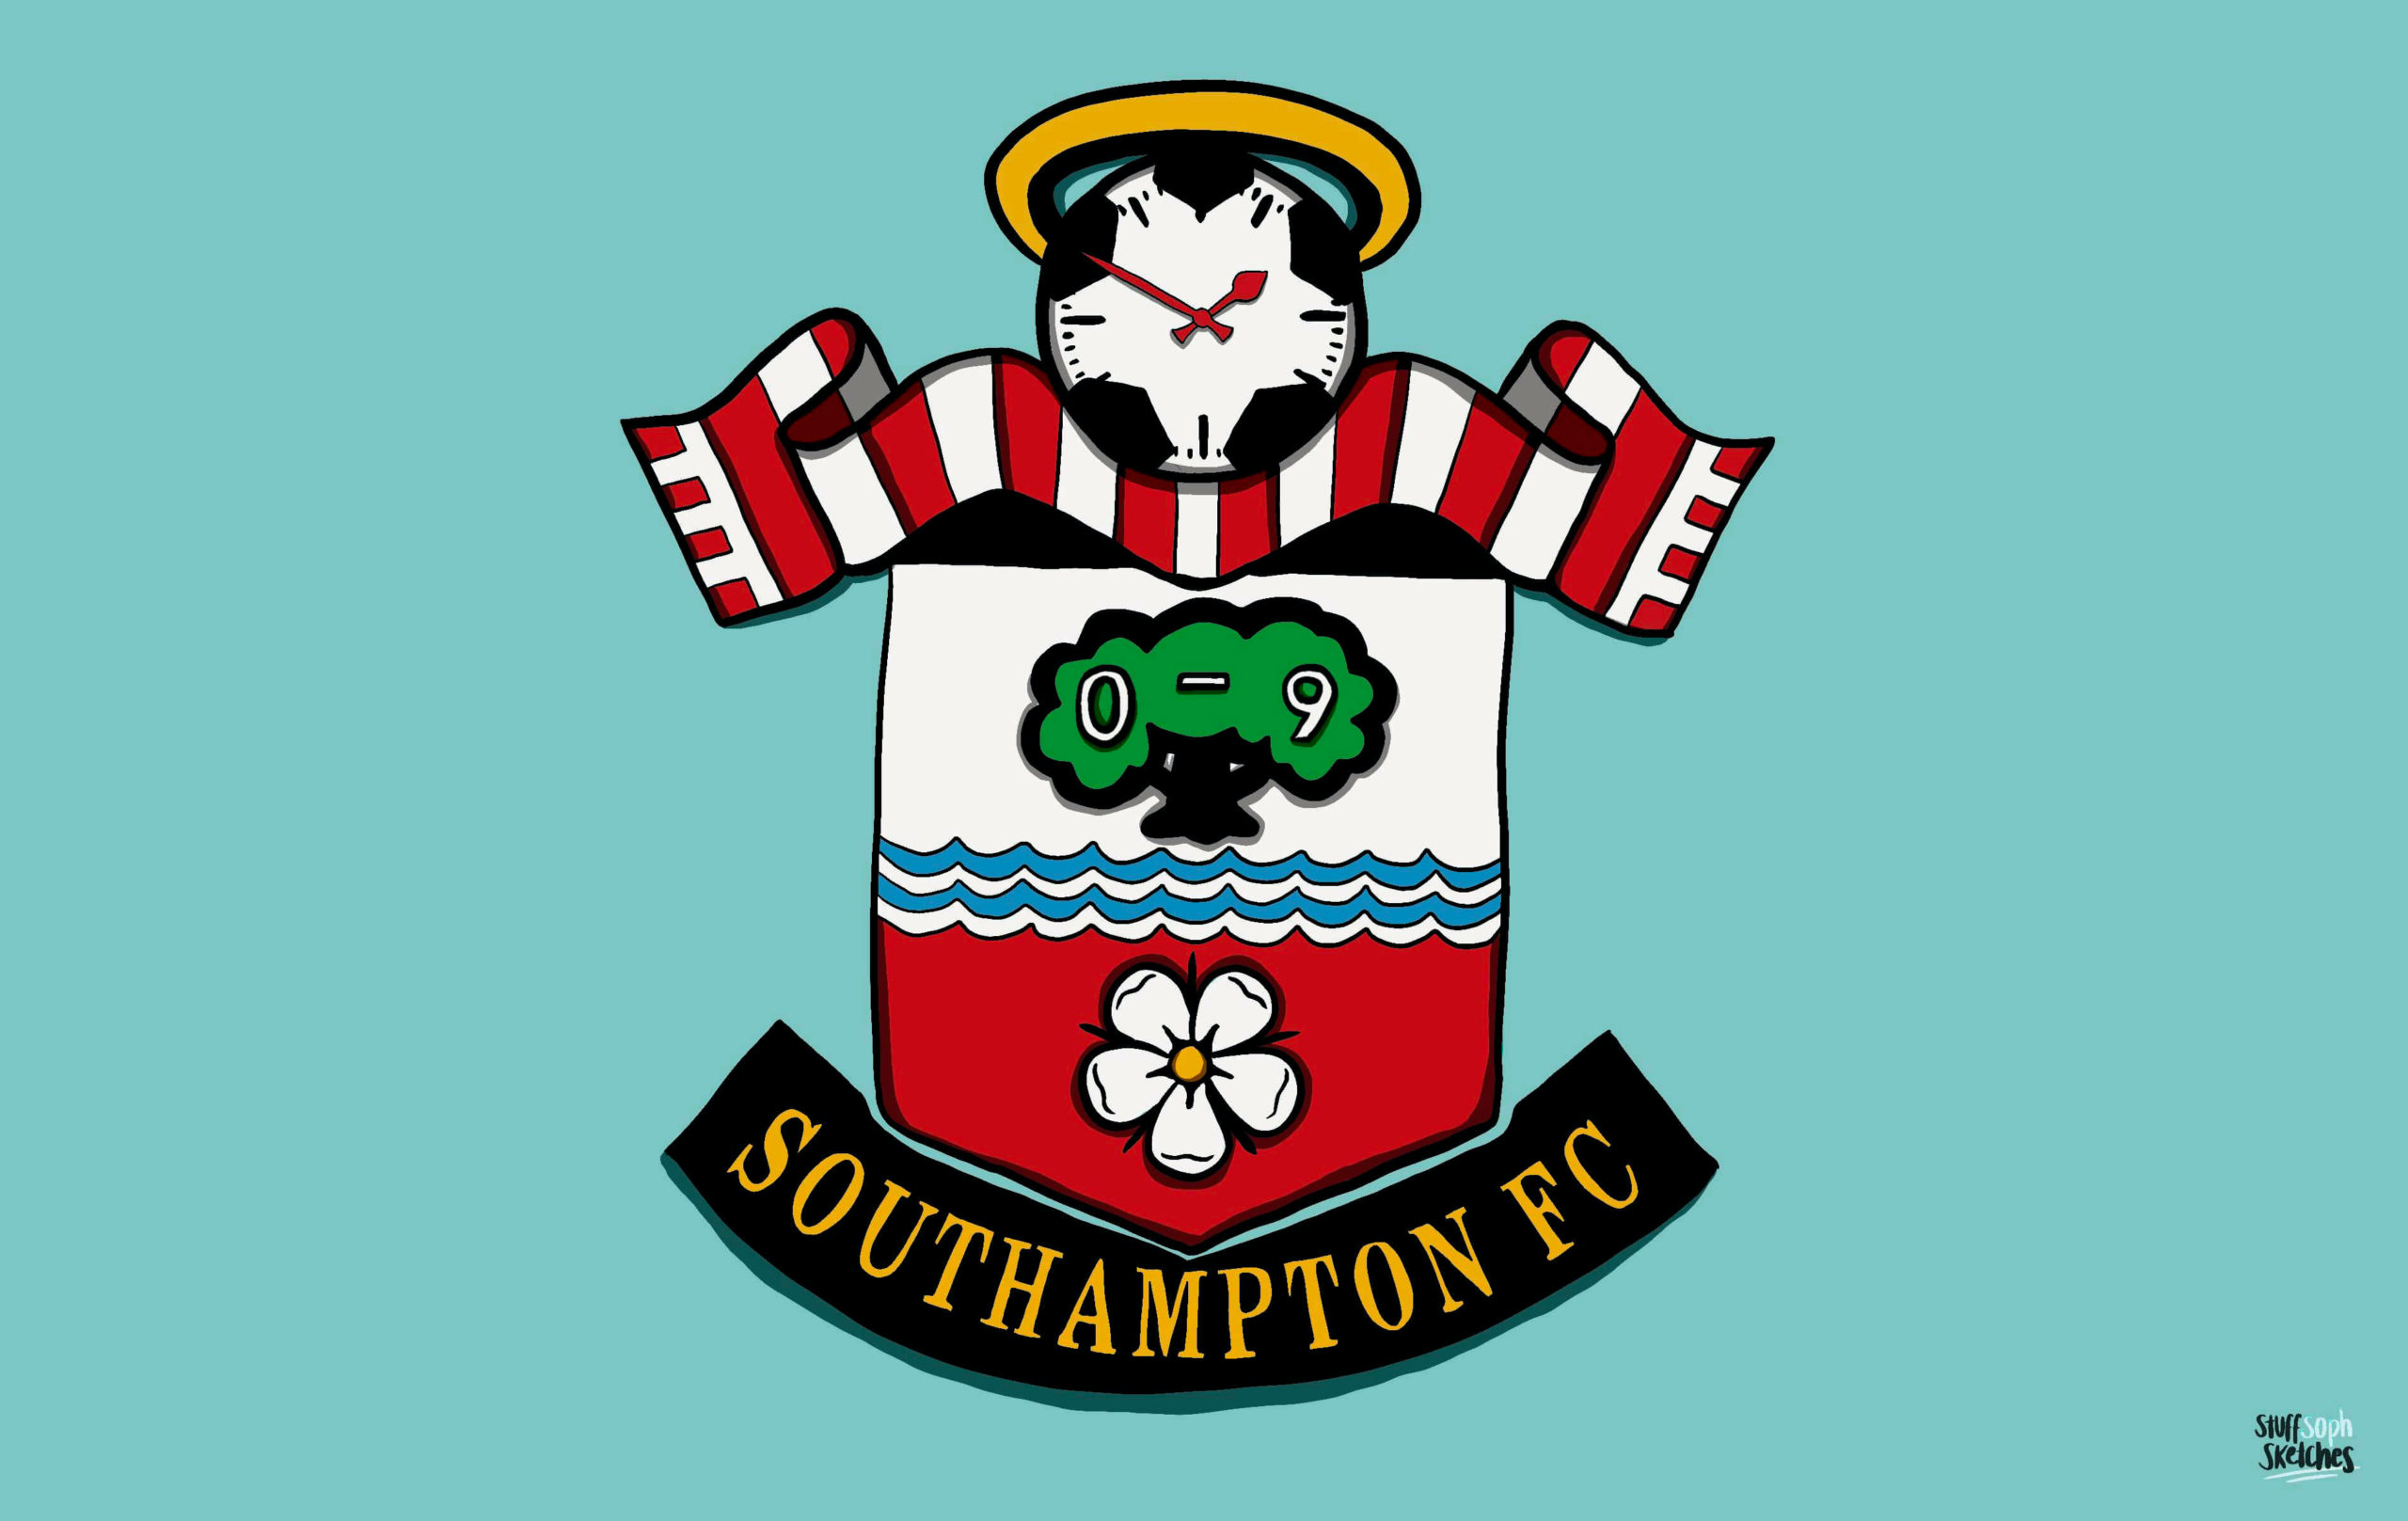 A Southampton badge edited to have a clock and 0-9 on